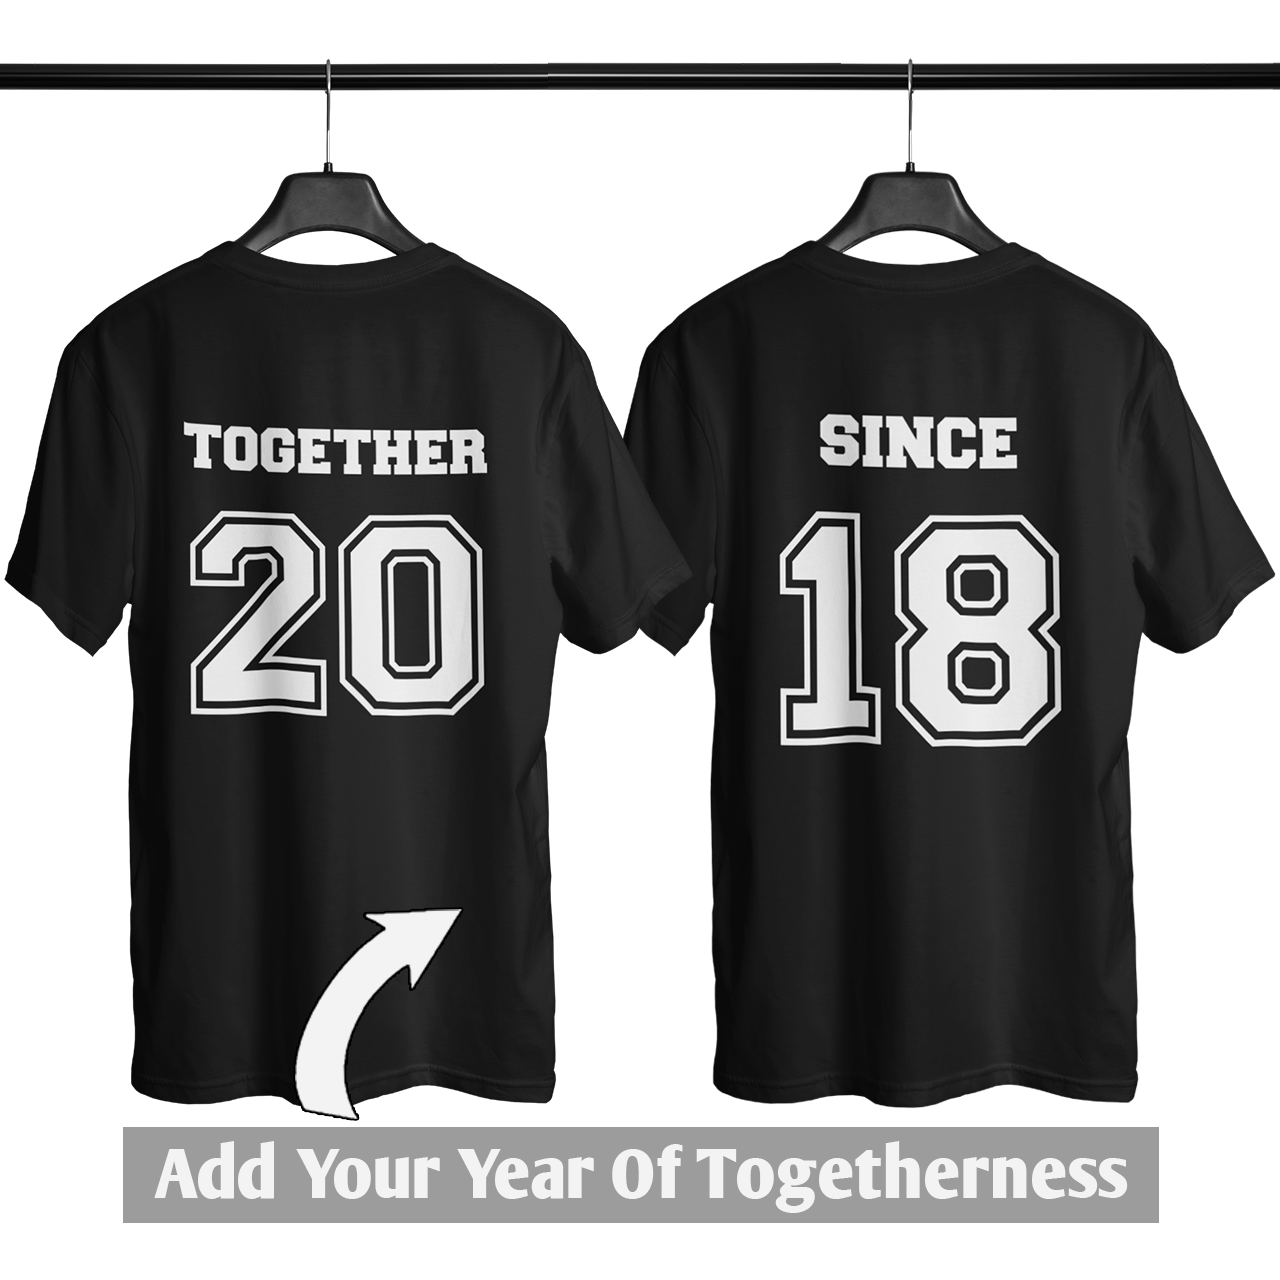 Together And Since Couple T Shirts Sixth Degree Clothing 